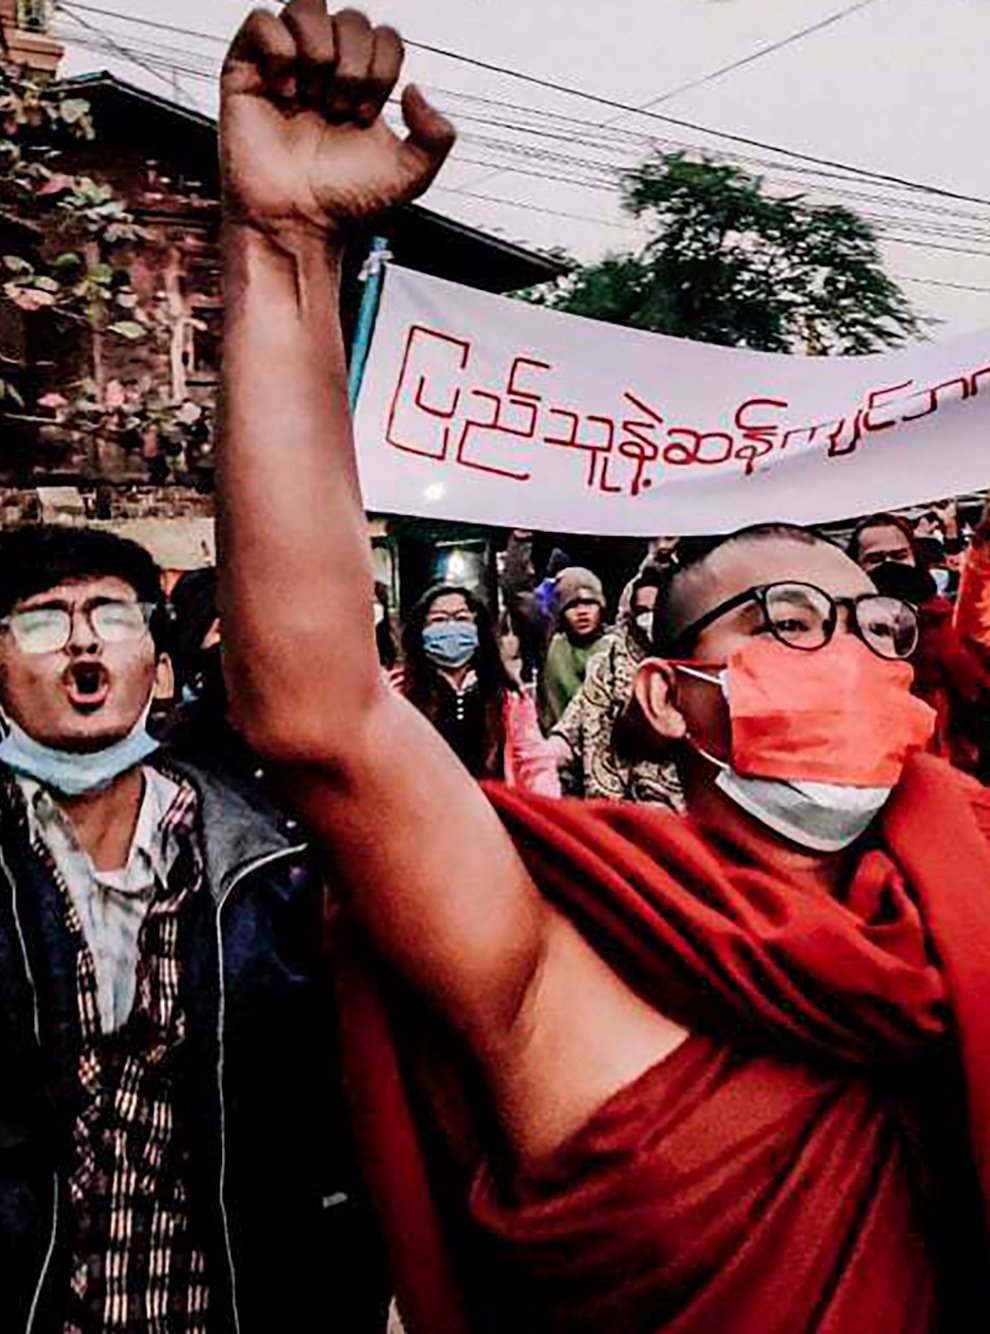 A Buddhist monk raises his clenched fist during an anti-military government protest rally (AP)